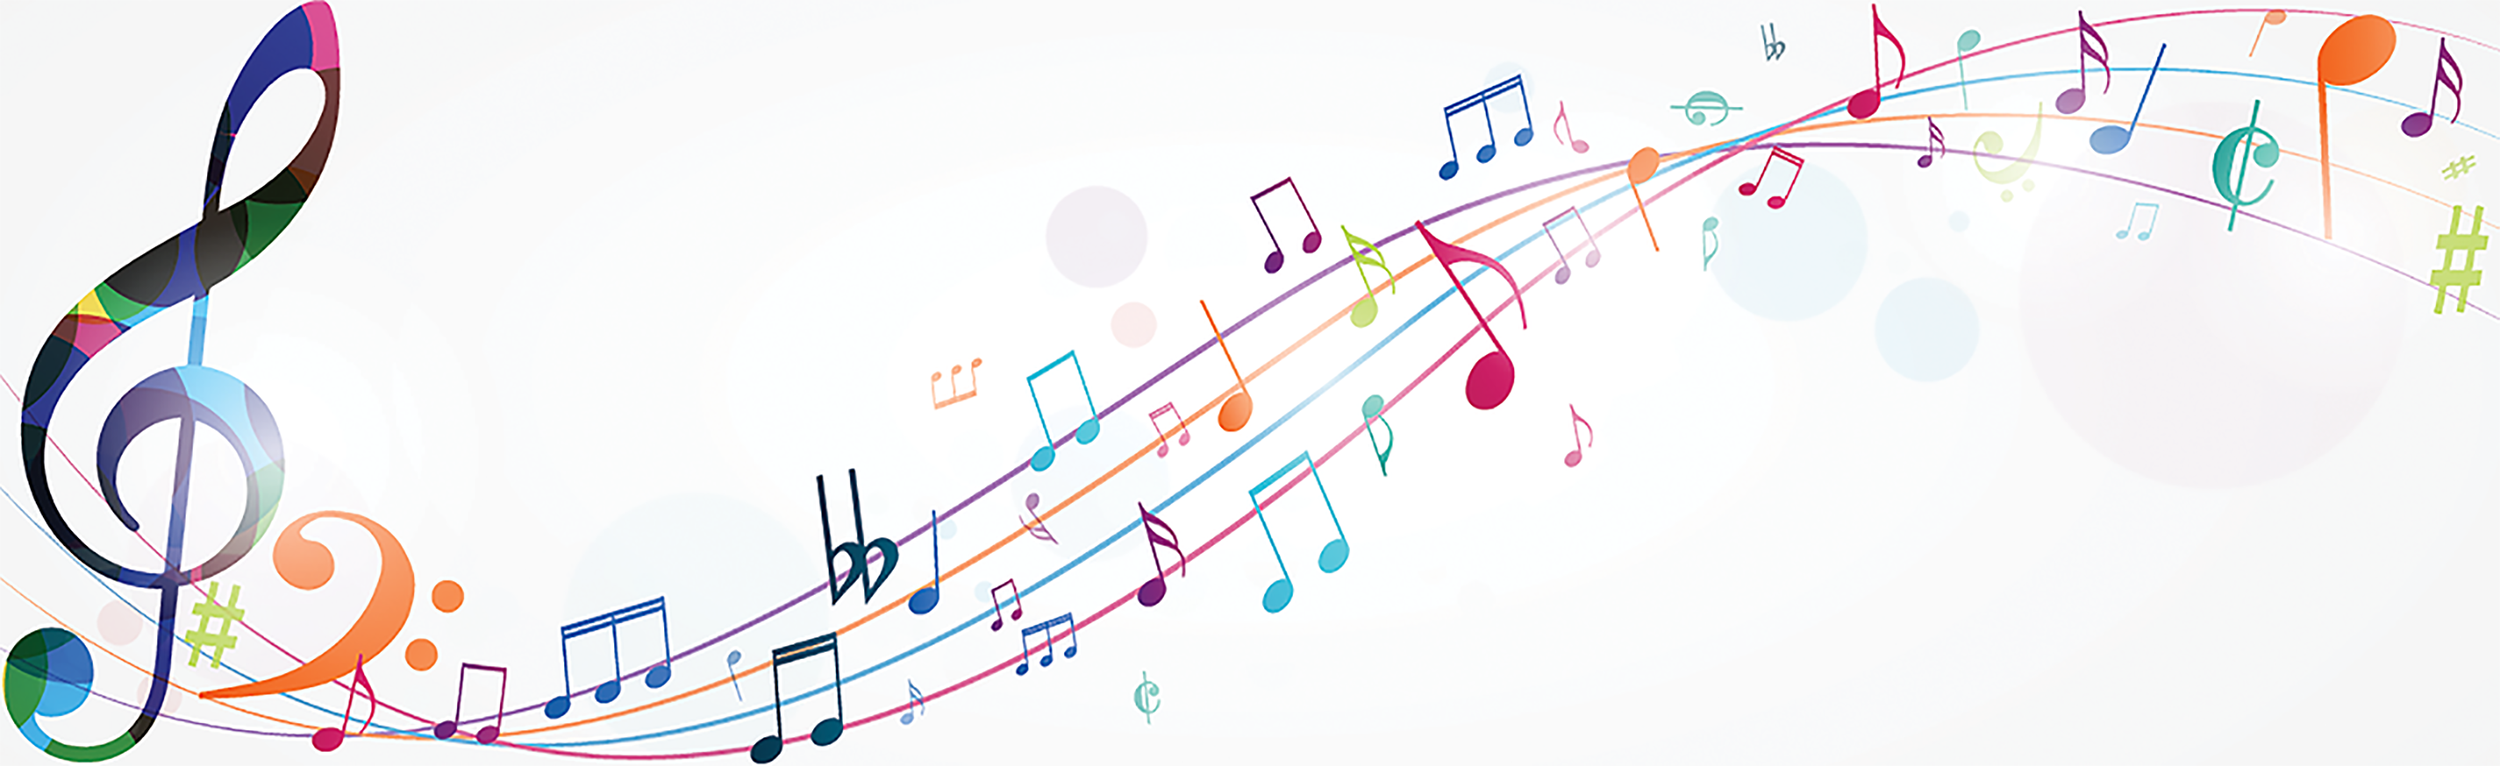 colorful music notes'>
	</div>
	<!--Use the main area to add the main content of the webpage-->
	<main>
	
	<div id =